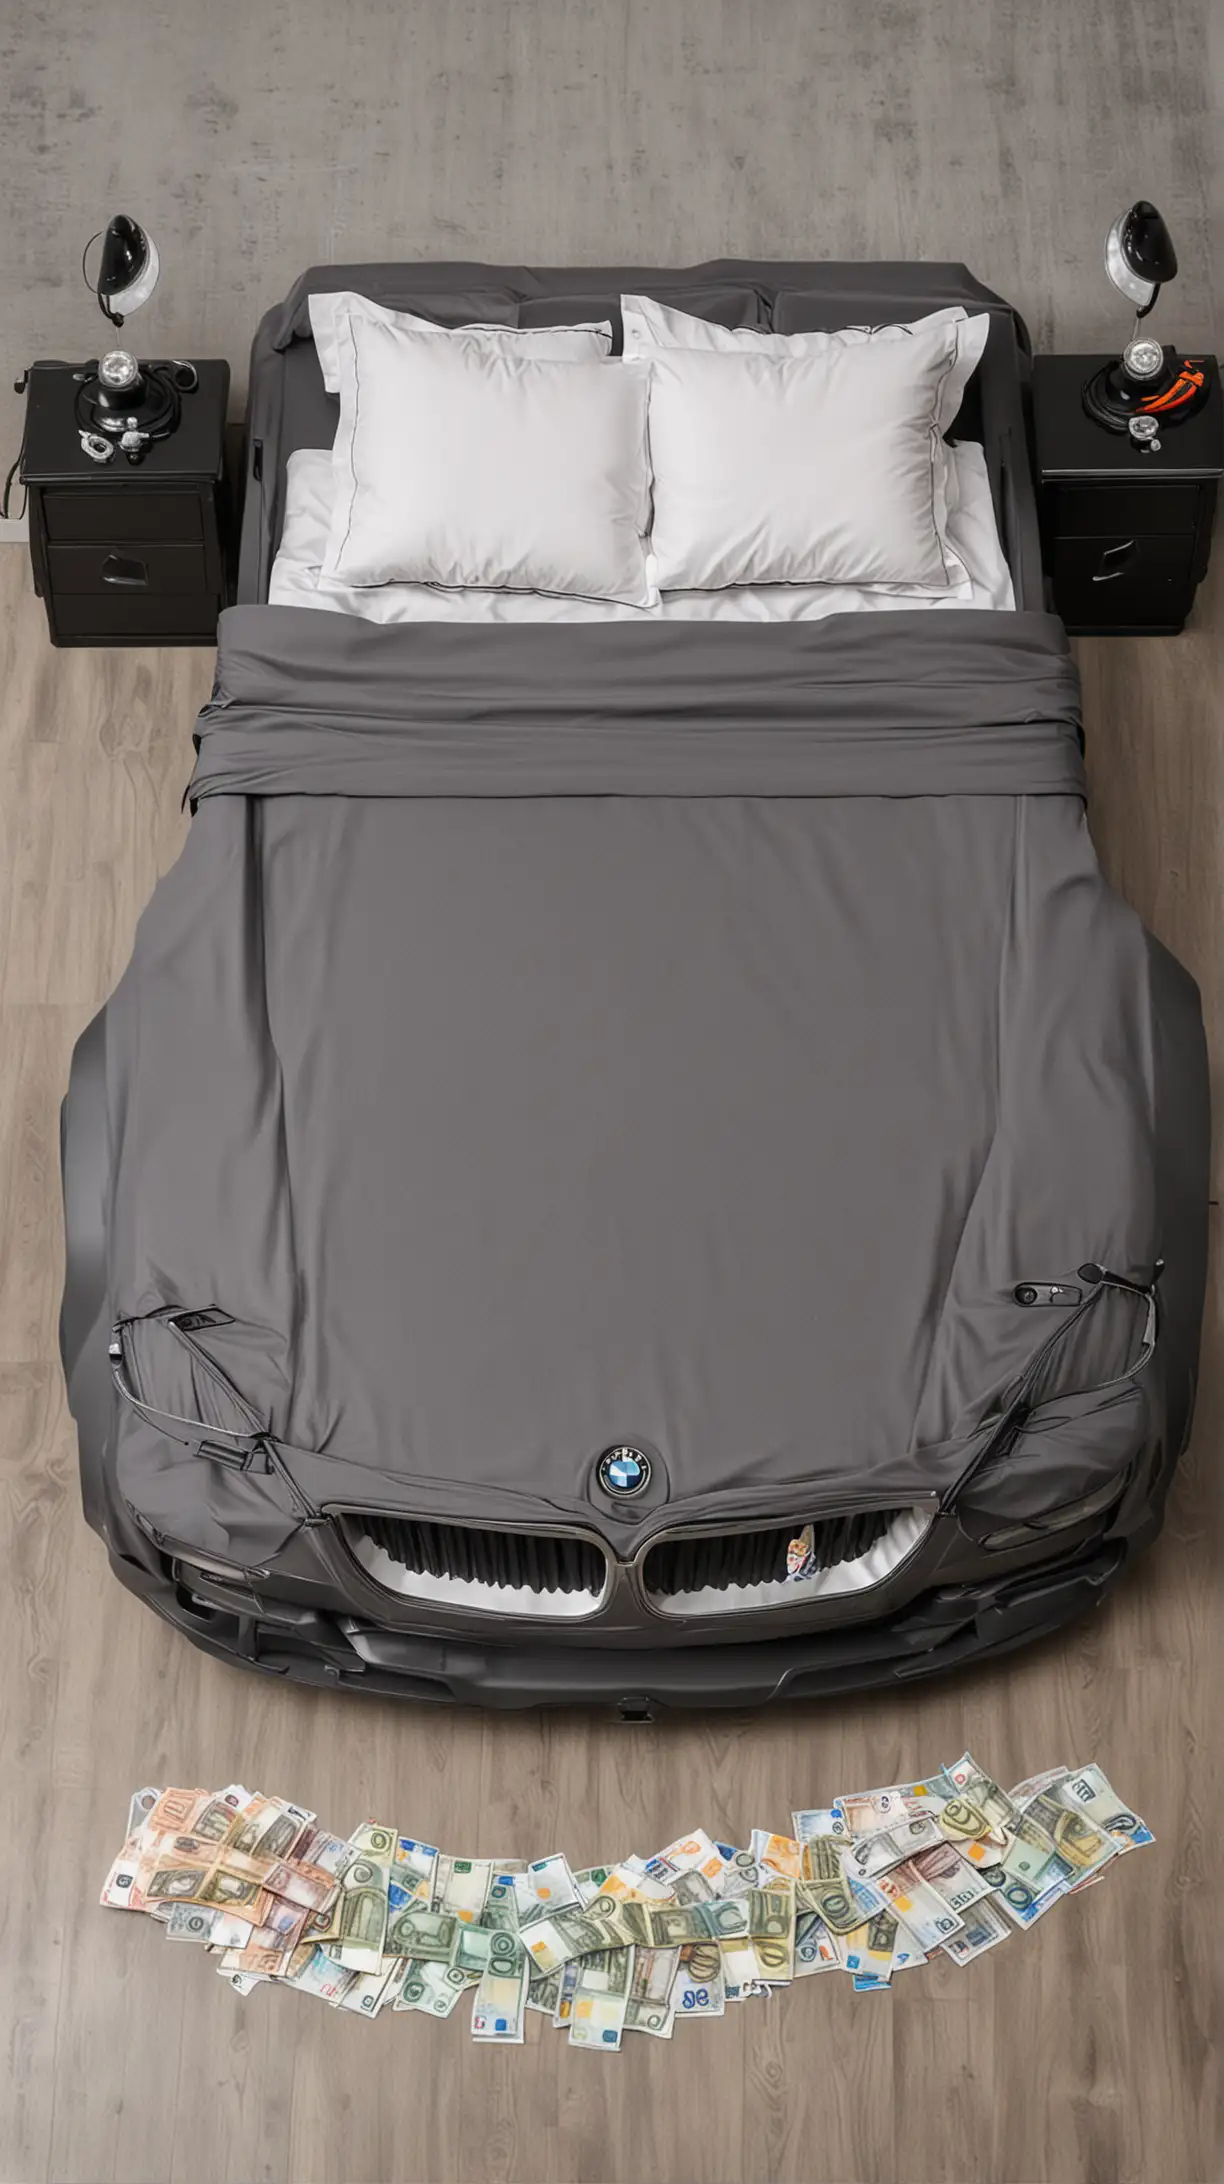 BMW CarShaped Double Bed with Euro Money Worm Graphite Illuminated by Headlights